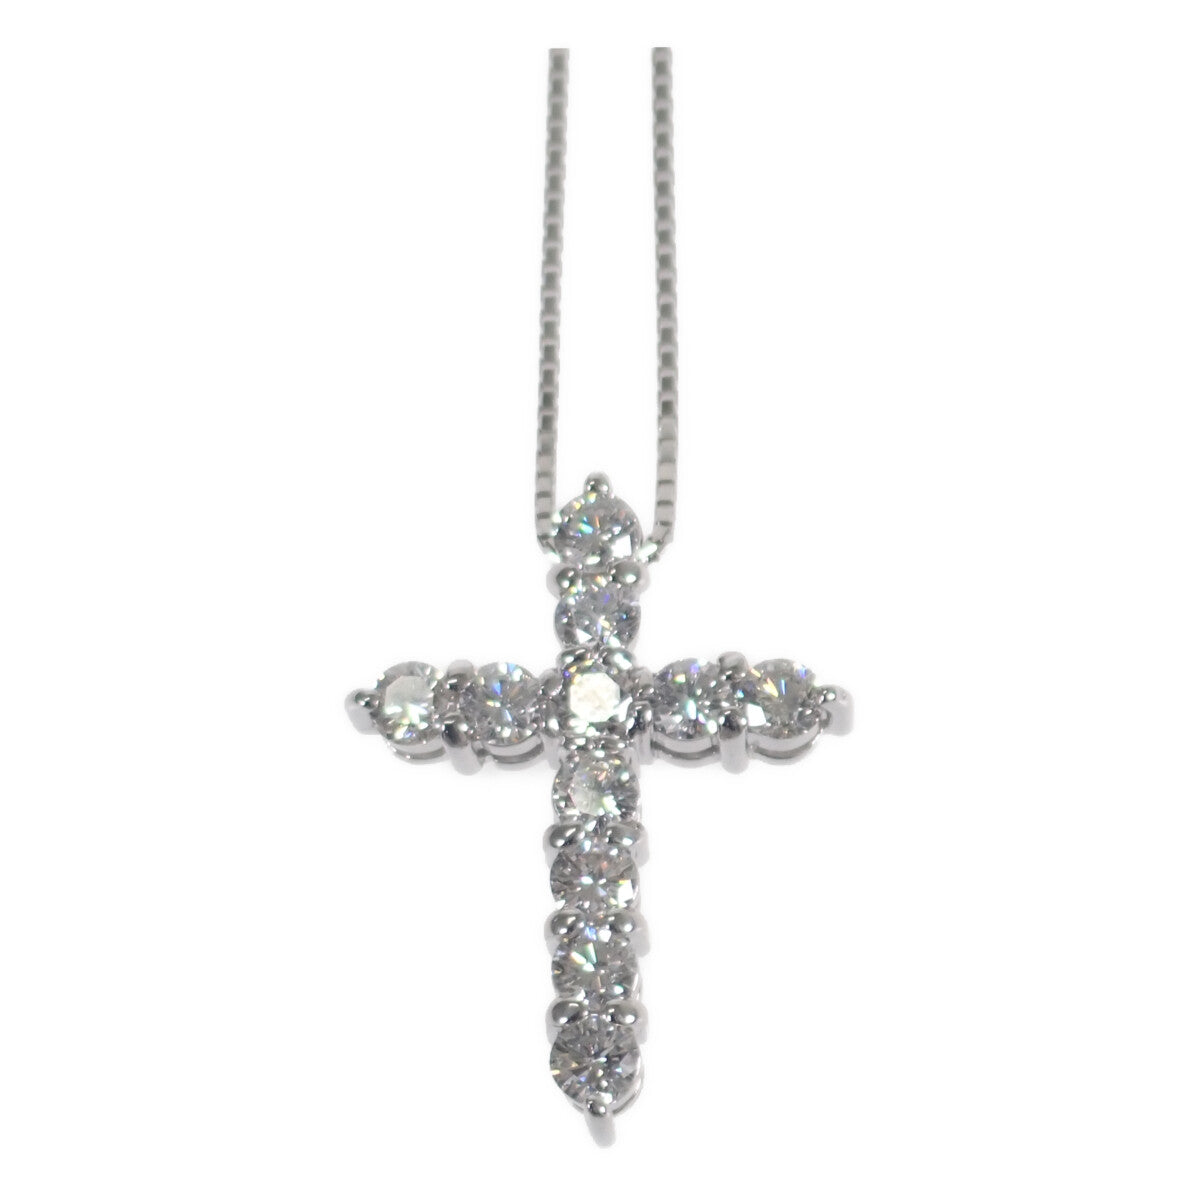 K18 White Gold Cross Design Necklace with 1.06ct Diamond for Women